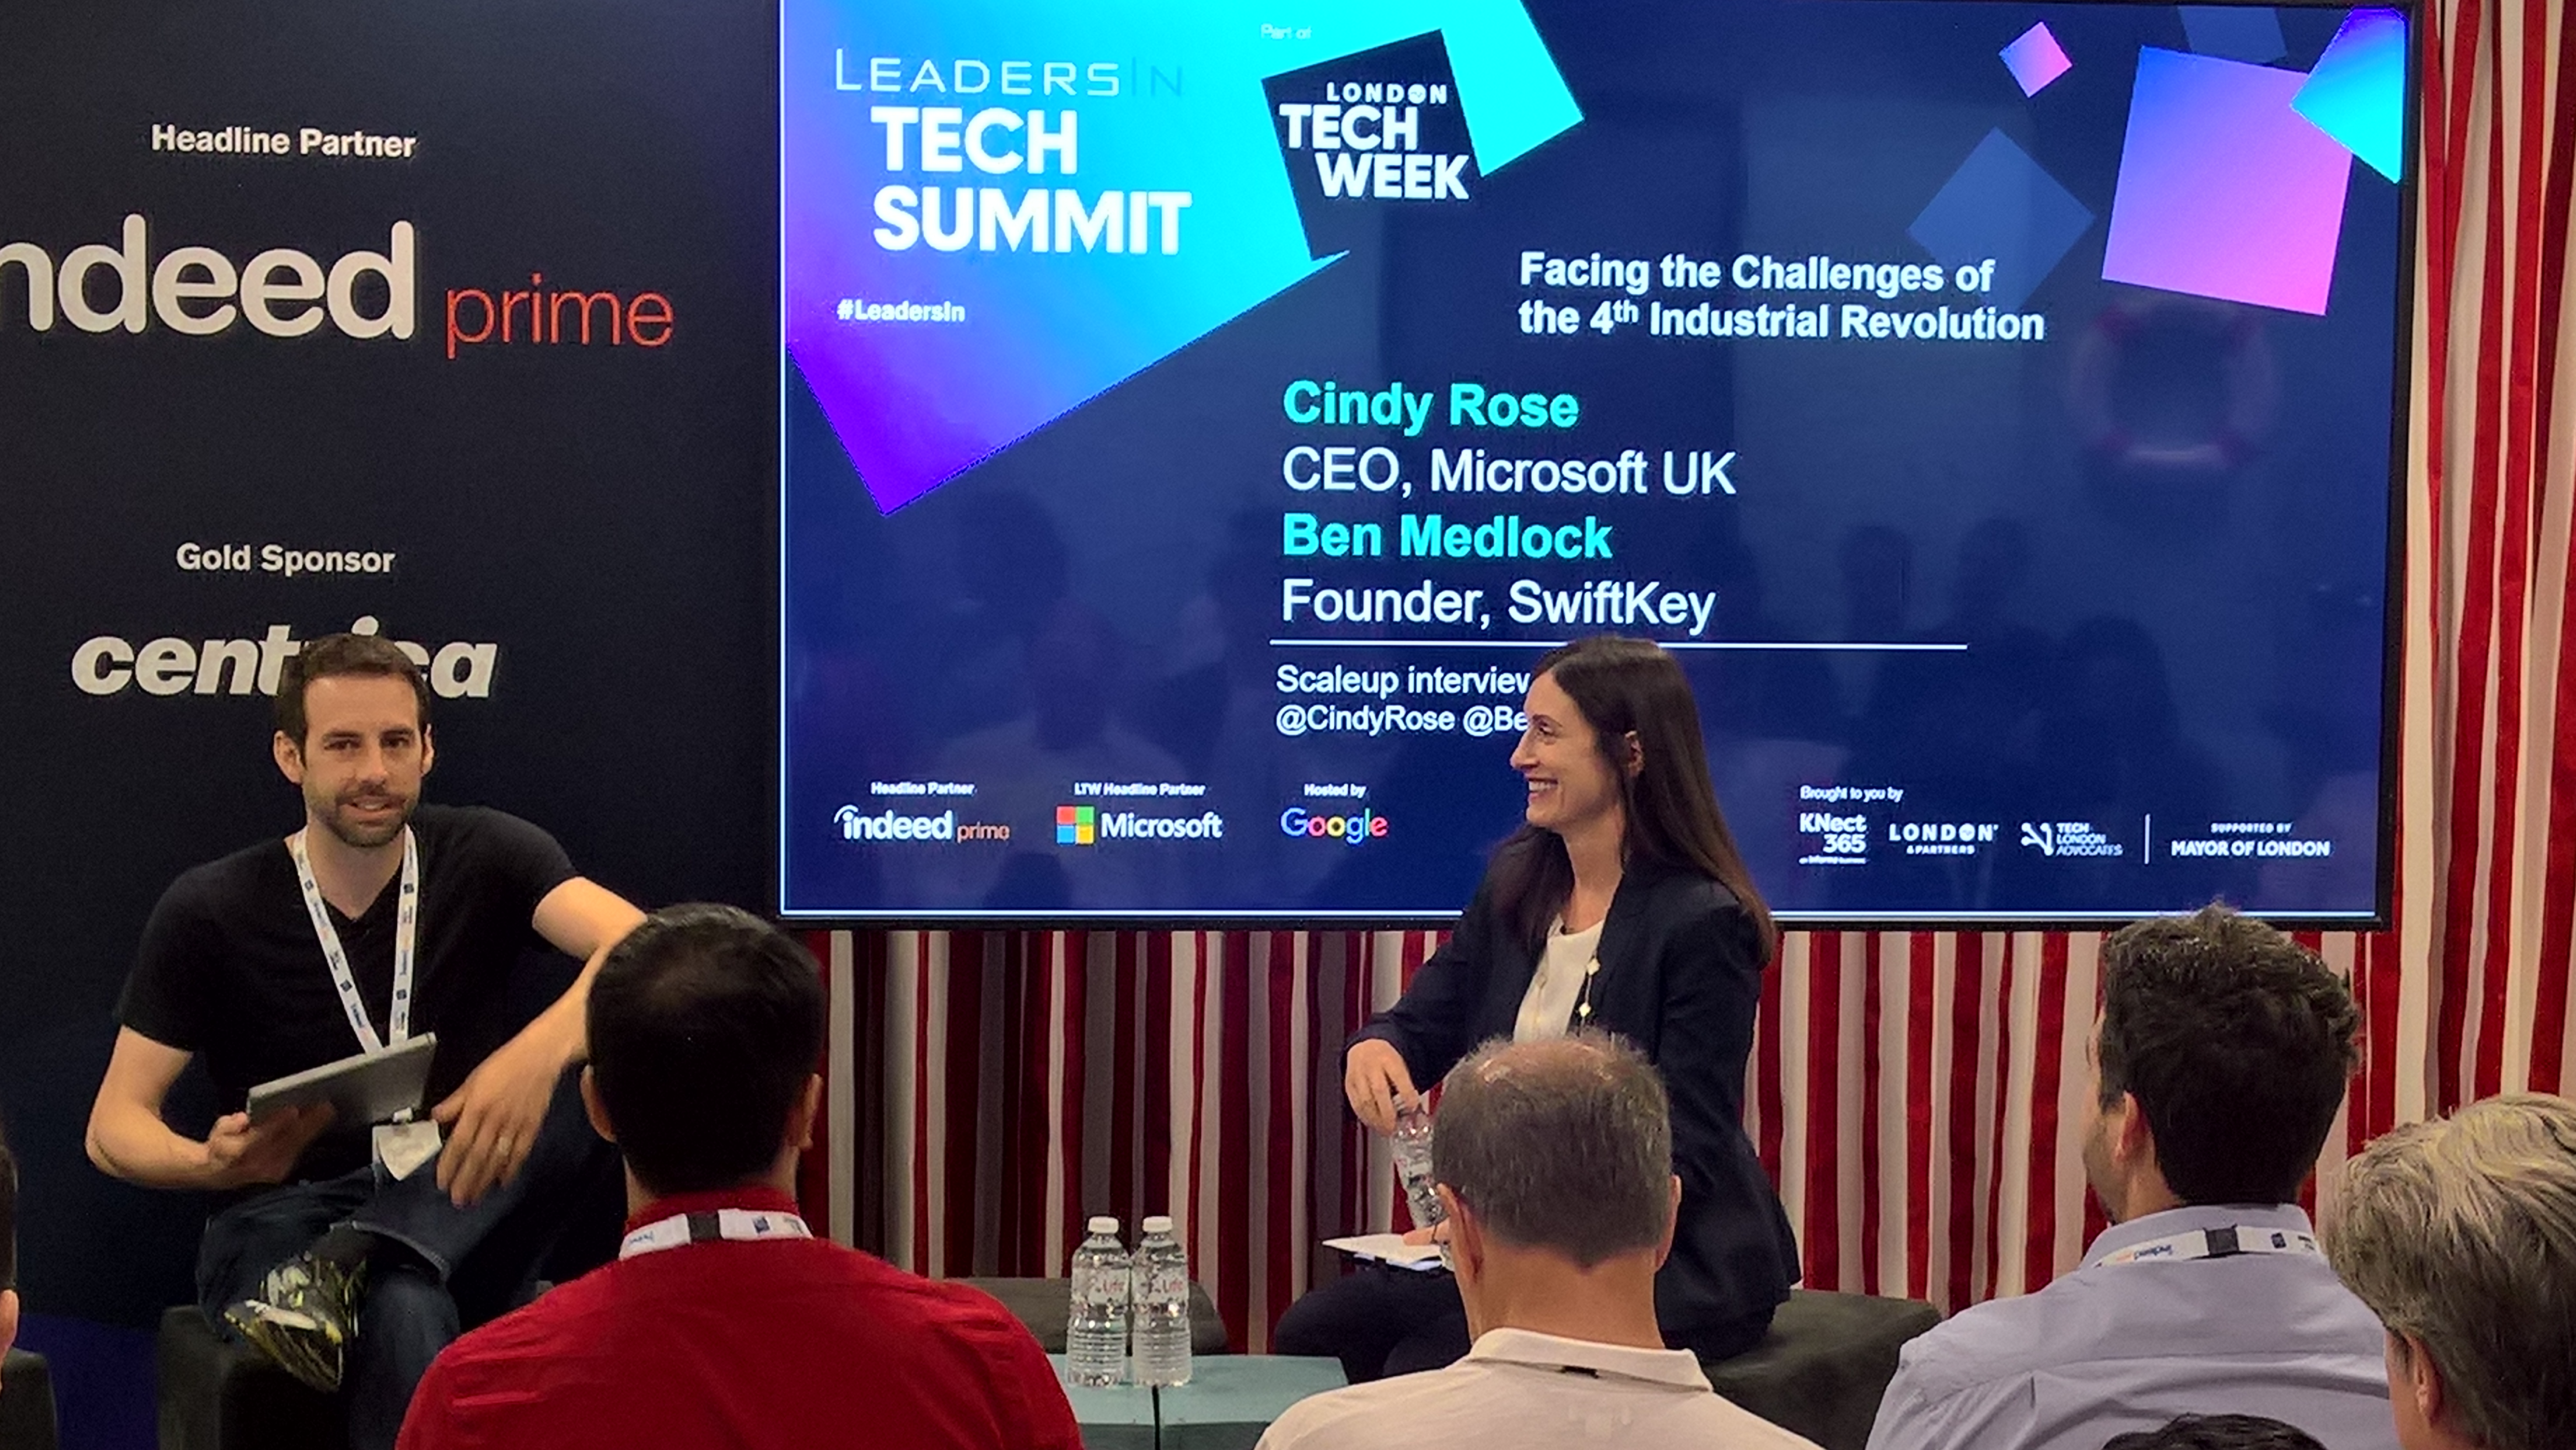 Cindy Rose, Microsoft UK CEO, and Ben Medlock, SwiftKey founder, talked about the fourth industrial revolution and artificial intelligence